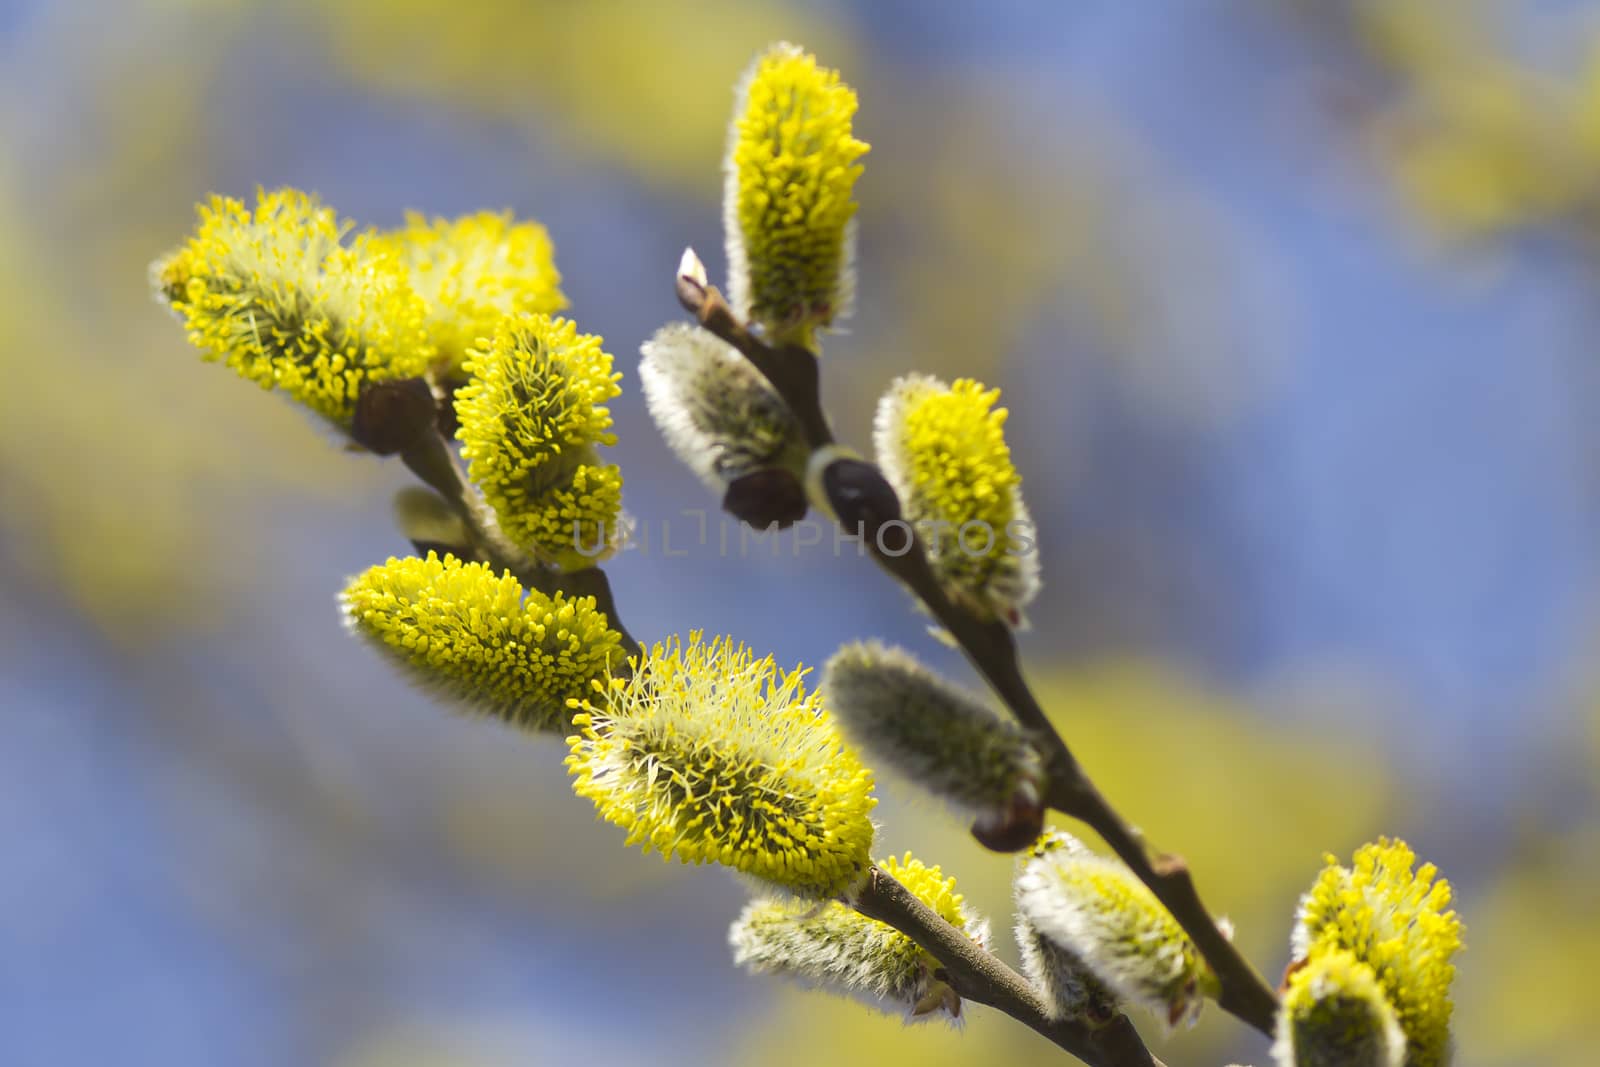 
Willow branches with fluffy yellow flowers.